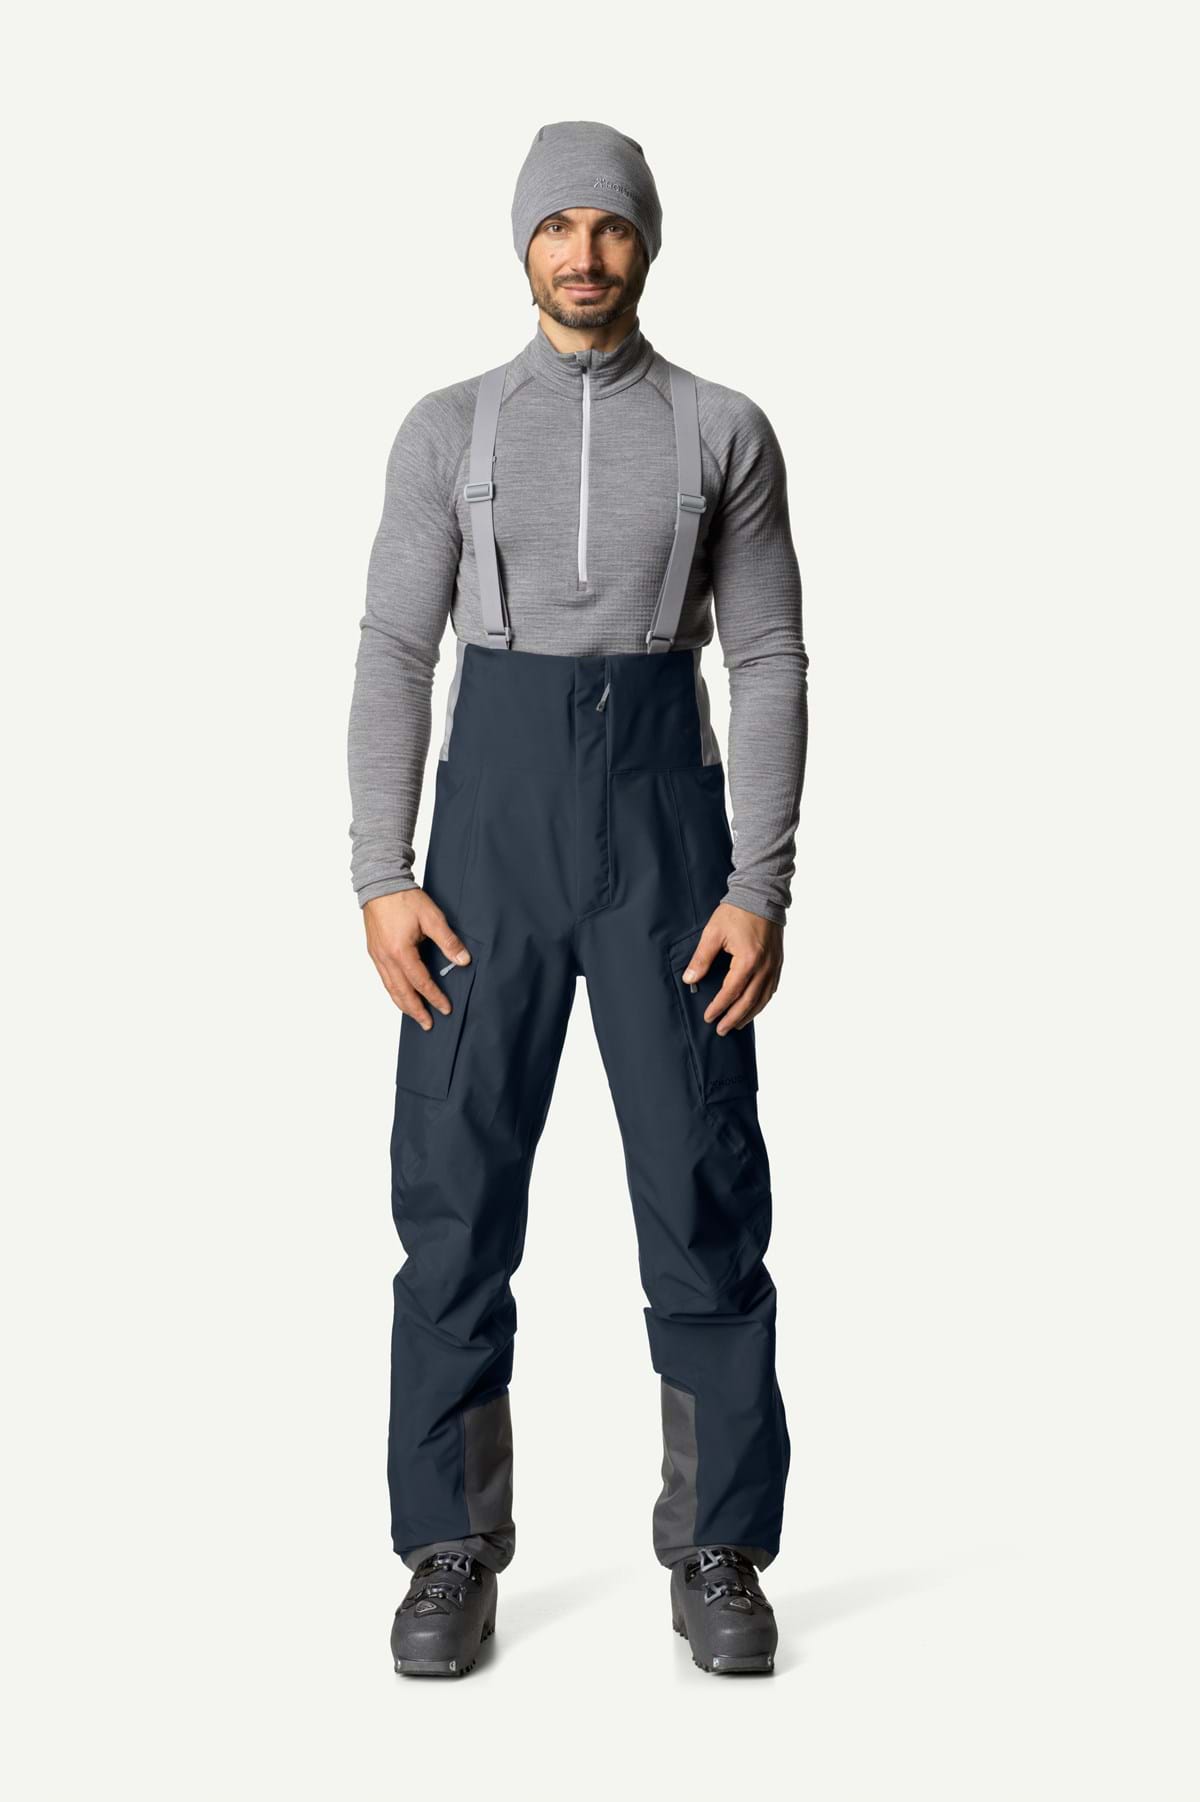 Recycled Polyester Workwear  Giving Pastic Waste A Second Purpose